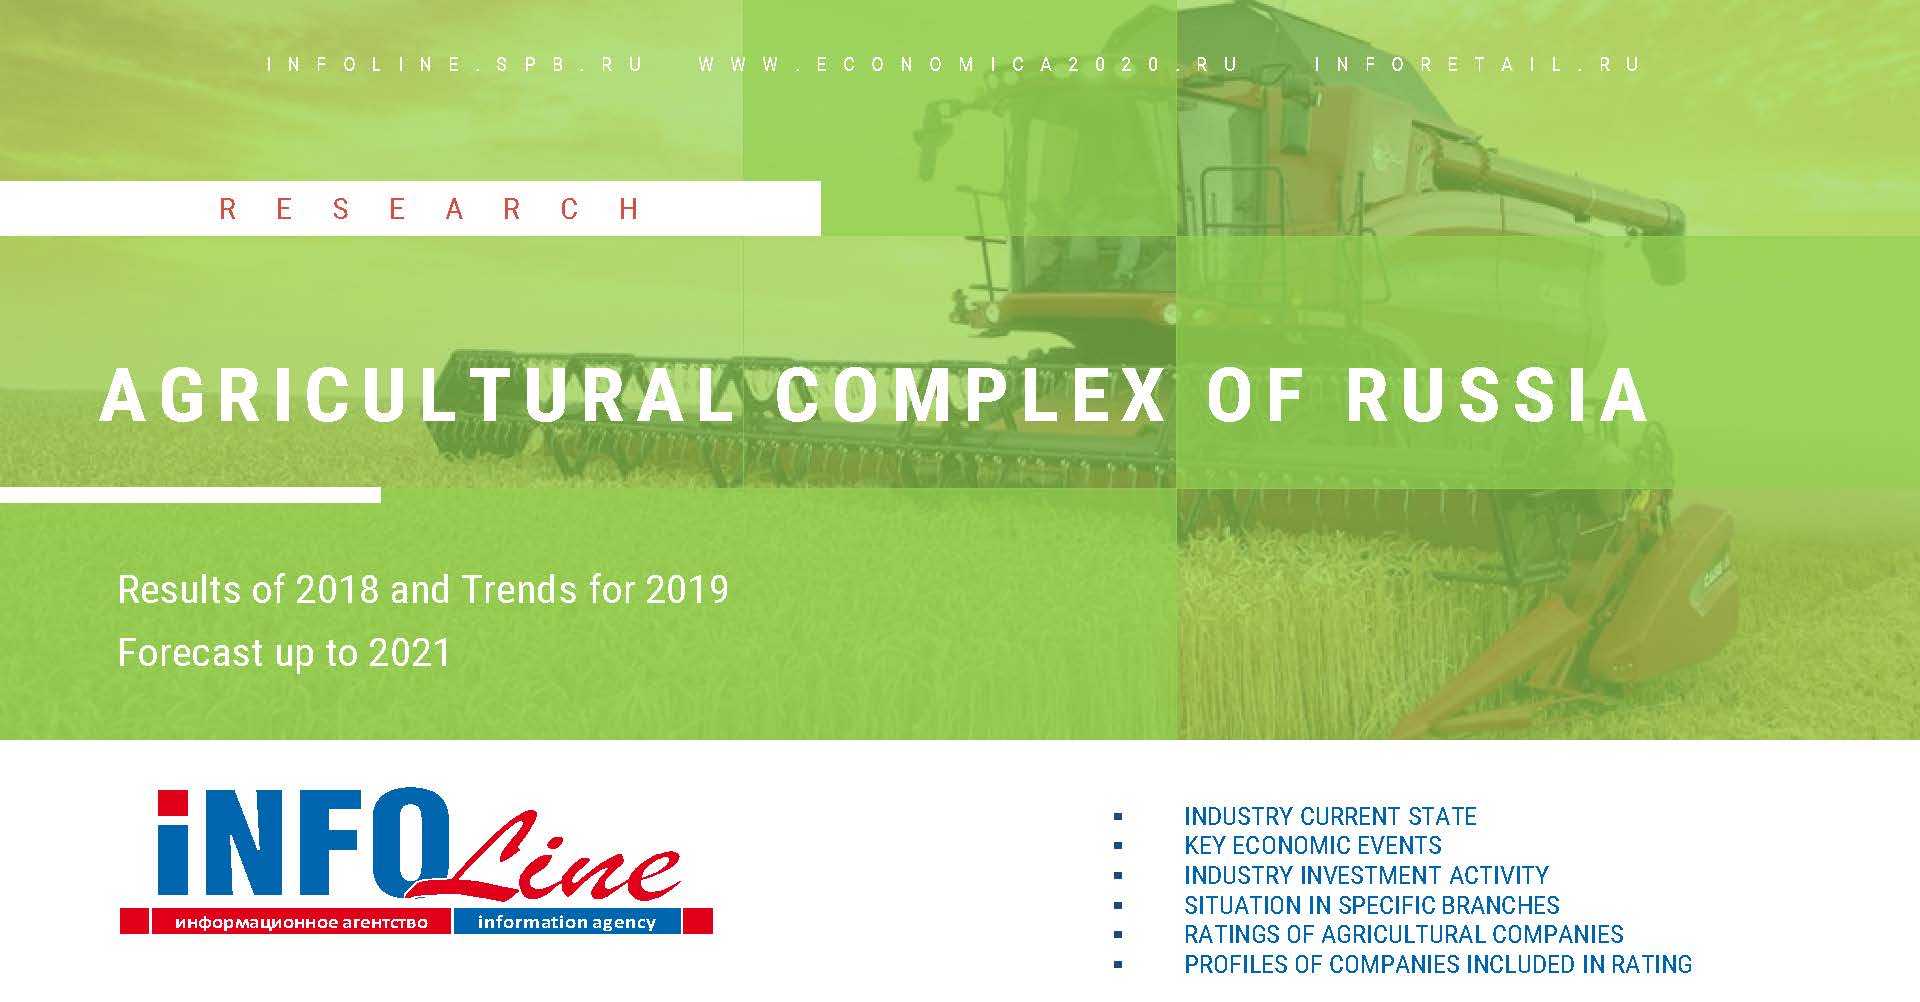 "Agricultural complex of Russia. Results of 2018 and Trends for 2019. Forecast up to 2021"